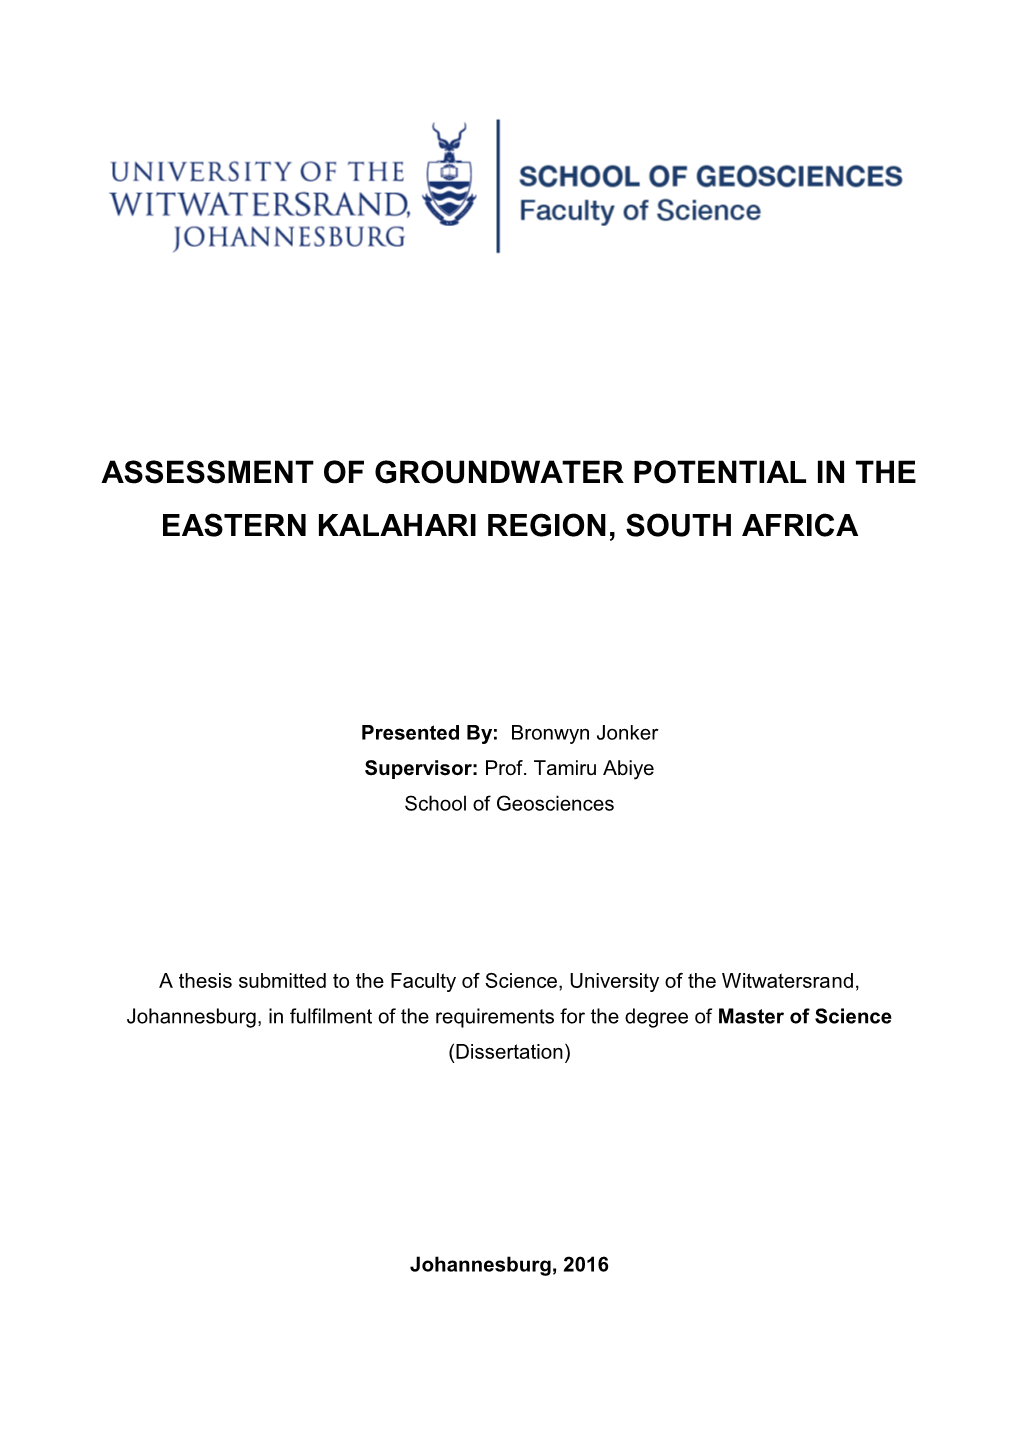 Assessment of Groundwater Potential in the Eastern Kalahari Region, South Africa